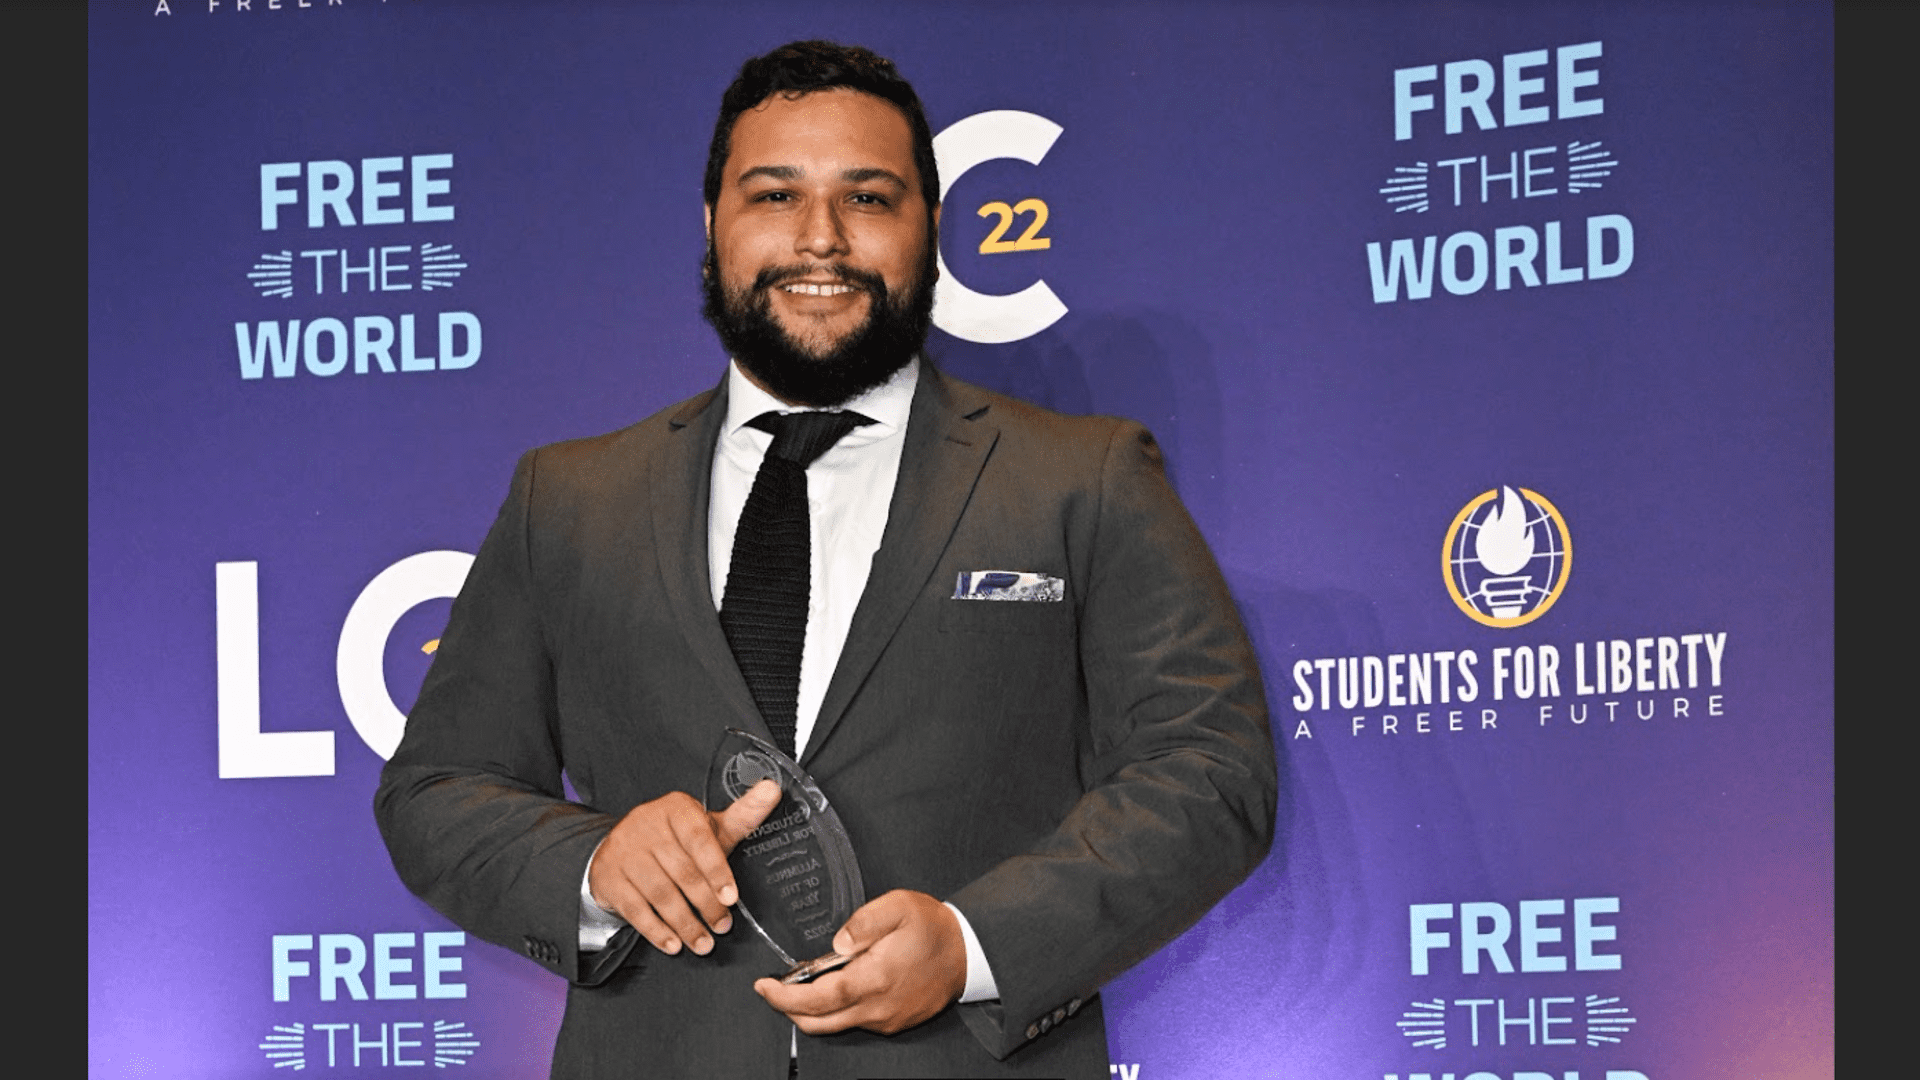 Ítalo Cunha, an alumnus of Students For Liberty Brasil (SFLB), received the award for Alumnus of the Year at LibertyCon International 2022.